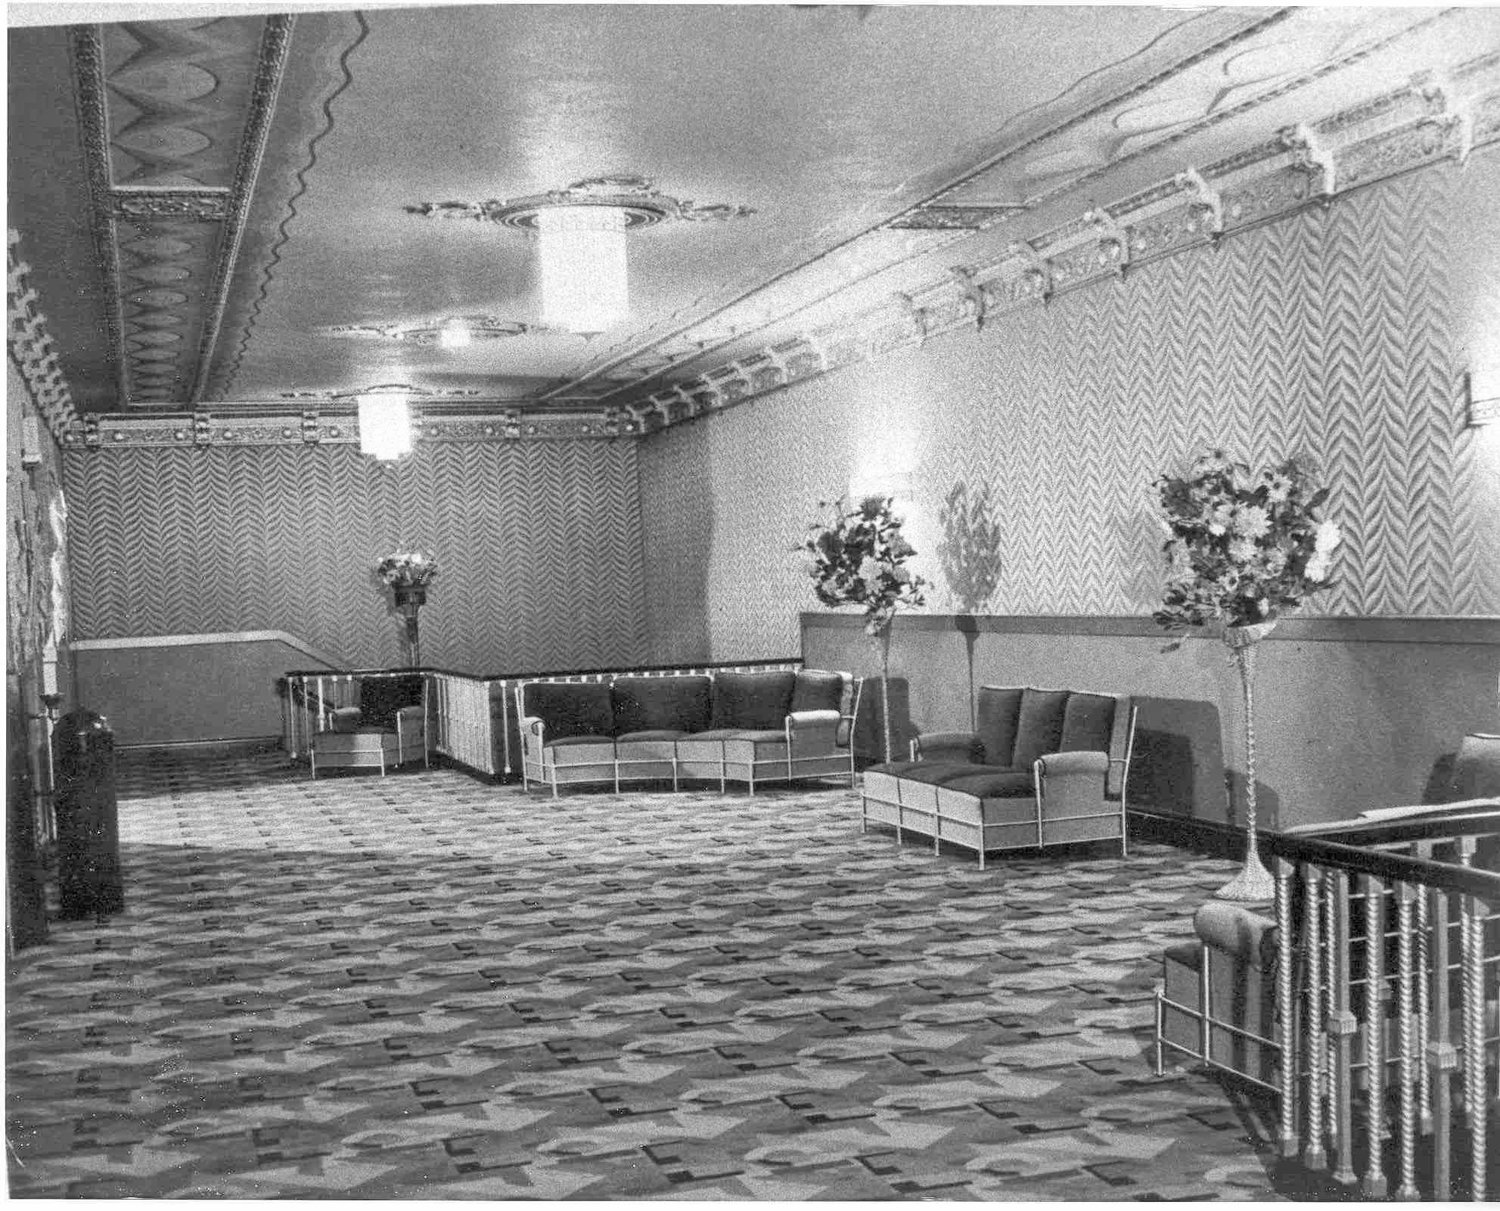 BACK IN TIME — Here is the mezzanine foyer of Rome Capitol Theatre after renovations were completed back in 1939.  Current renovations are near completion and the public will have its first opportunity to view the new upgrades on July 17.